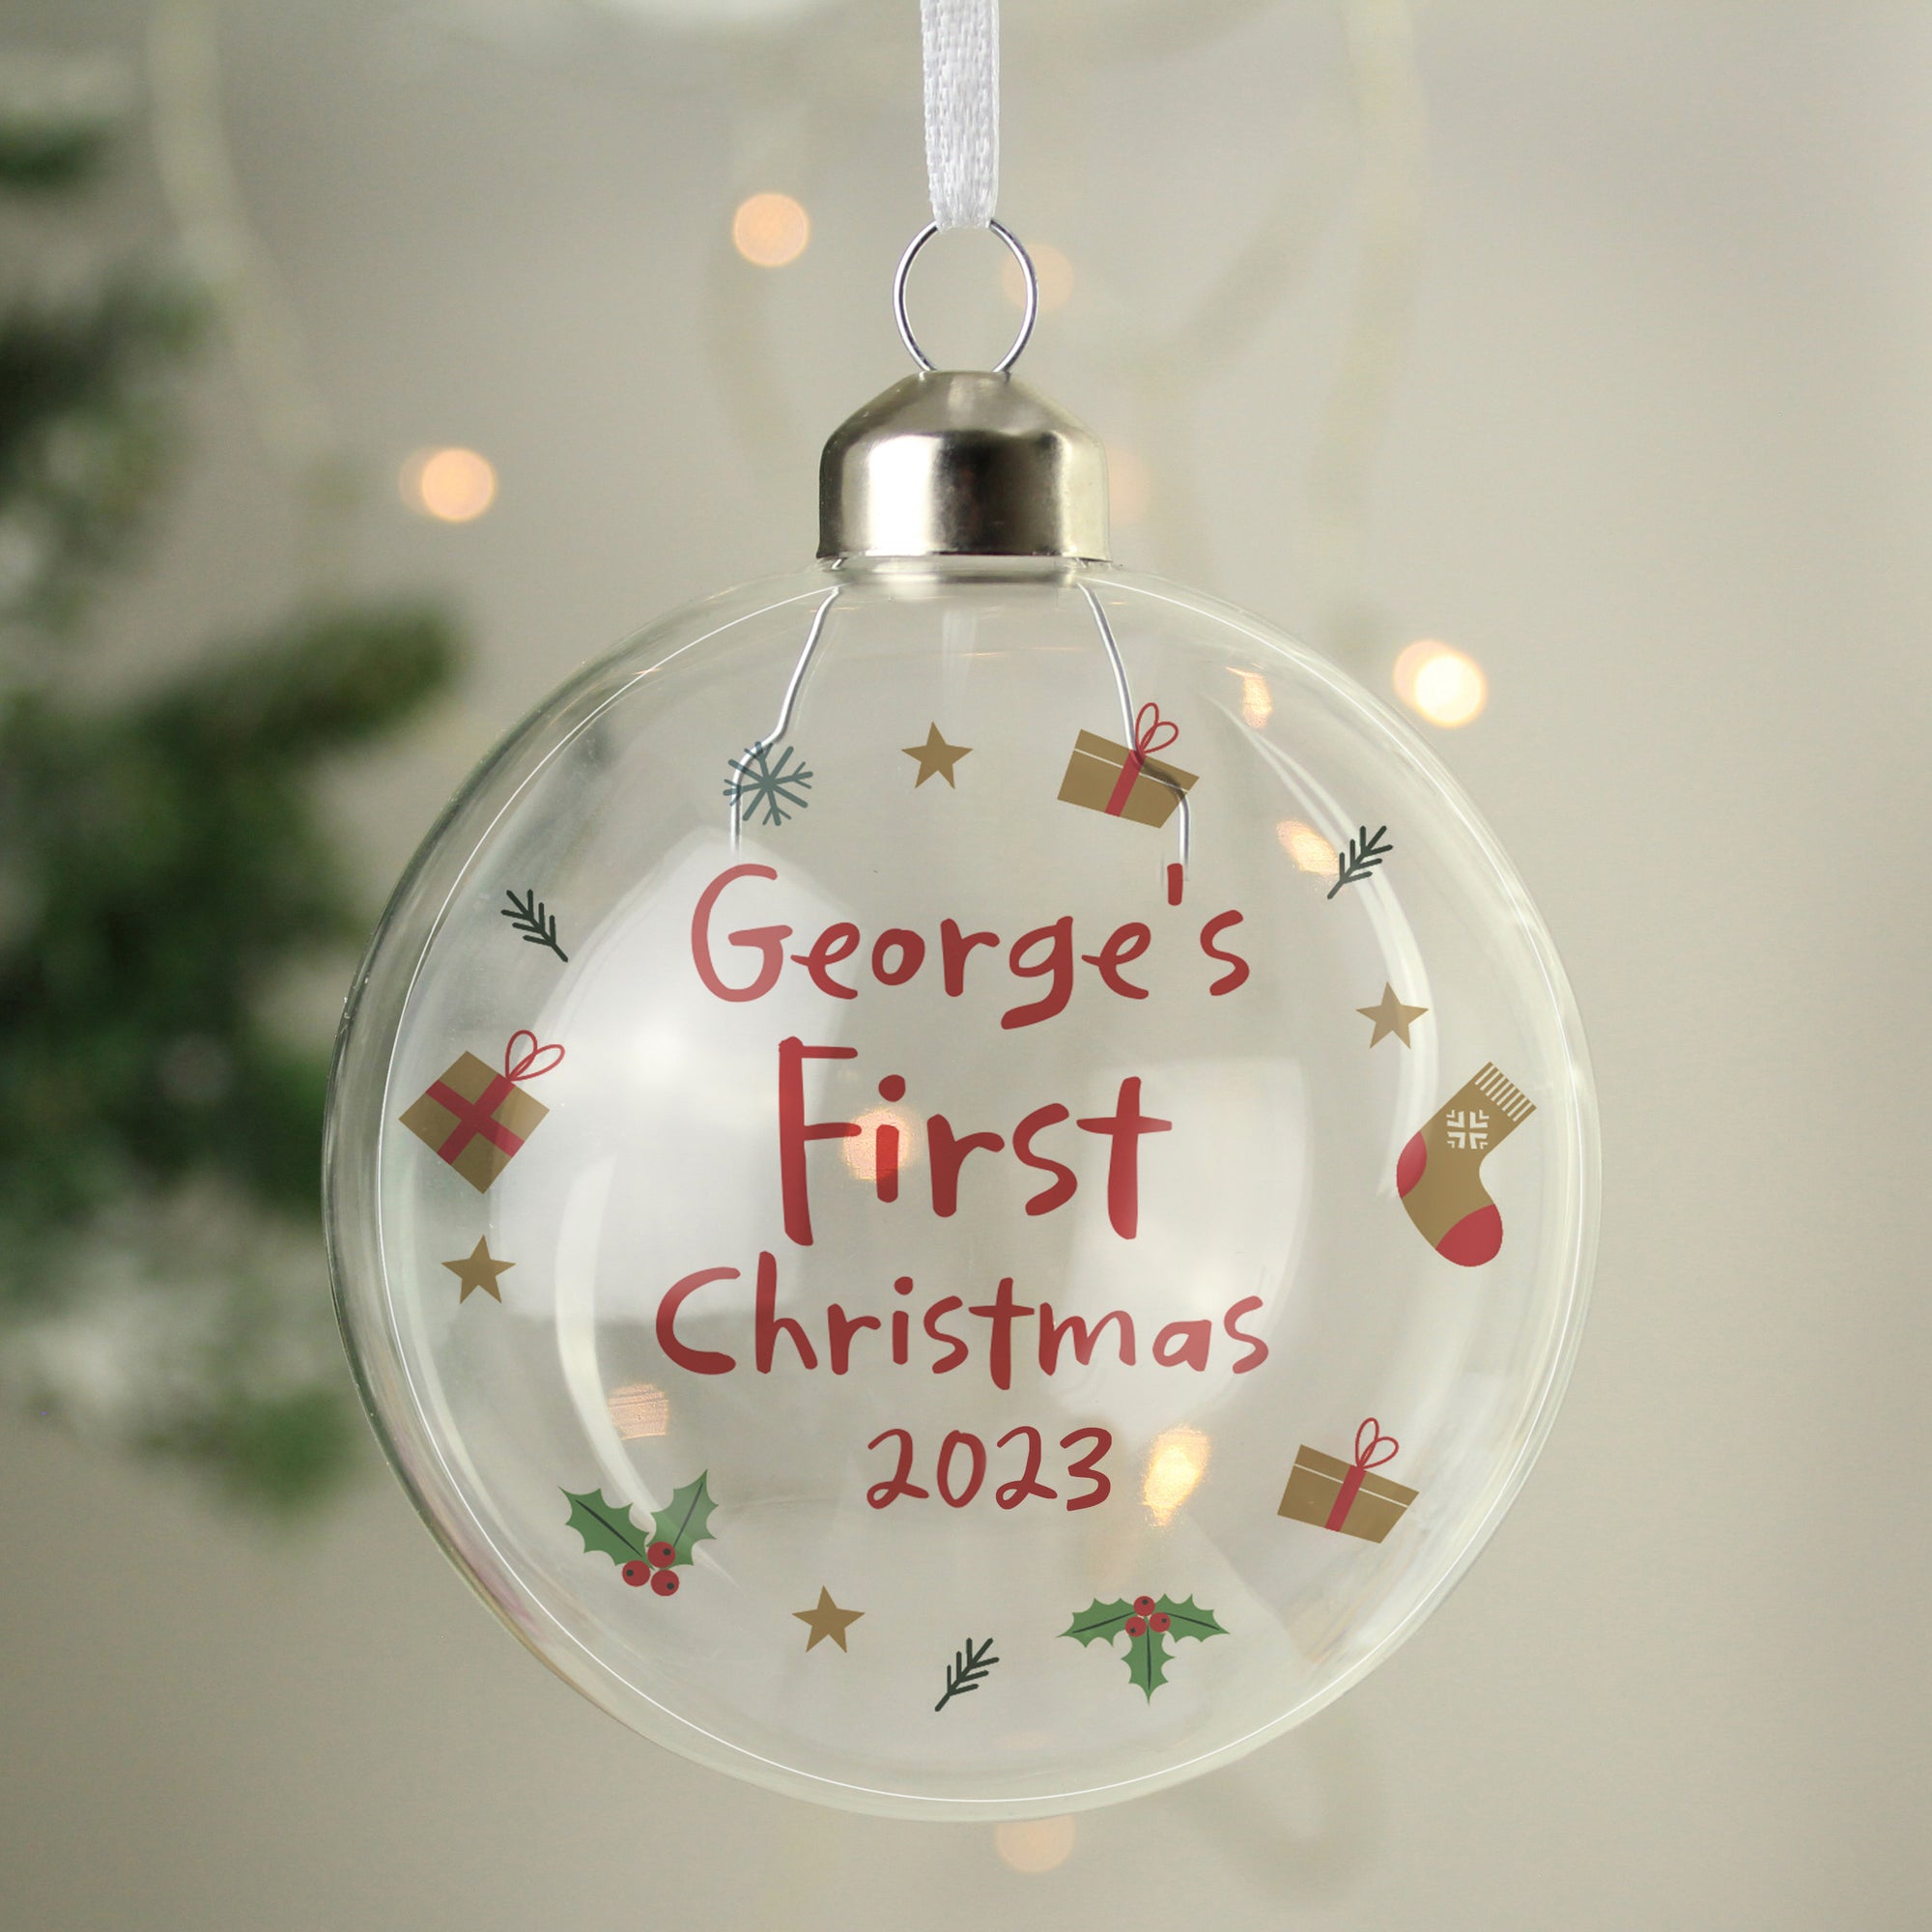 Image of a clear glass Christmas bauble which can be personalised with a name and year of your choice which will be printed in red font in a handwriting style. The bauble features the words 'First Christmas' as a fixed part of the design.